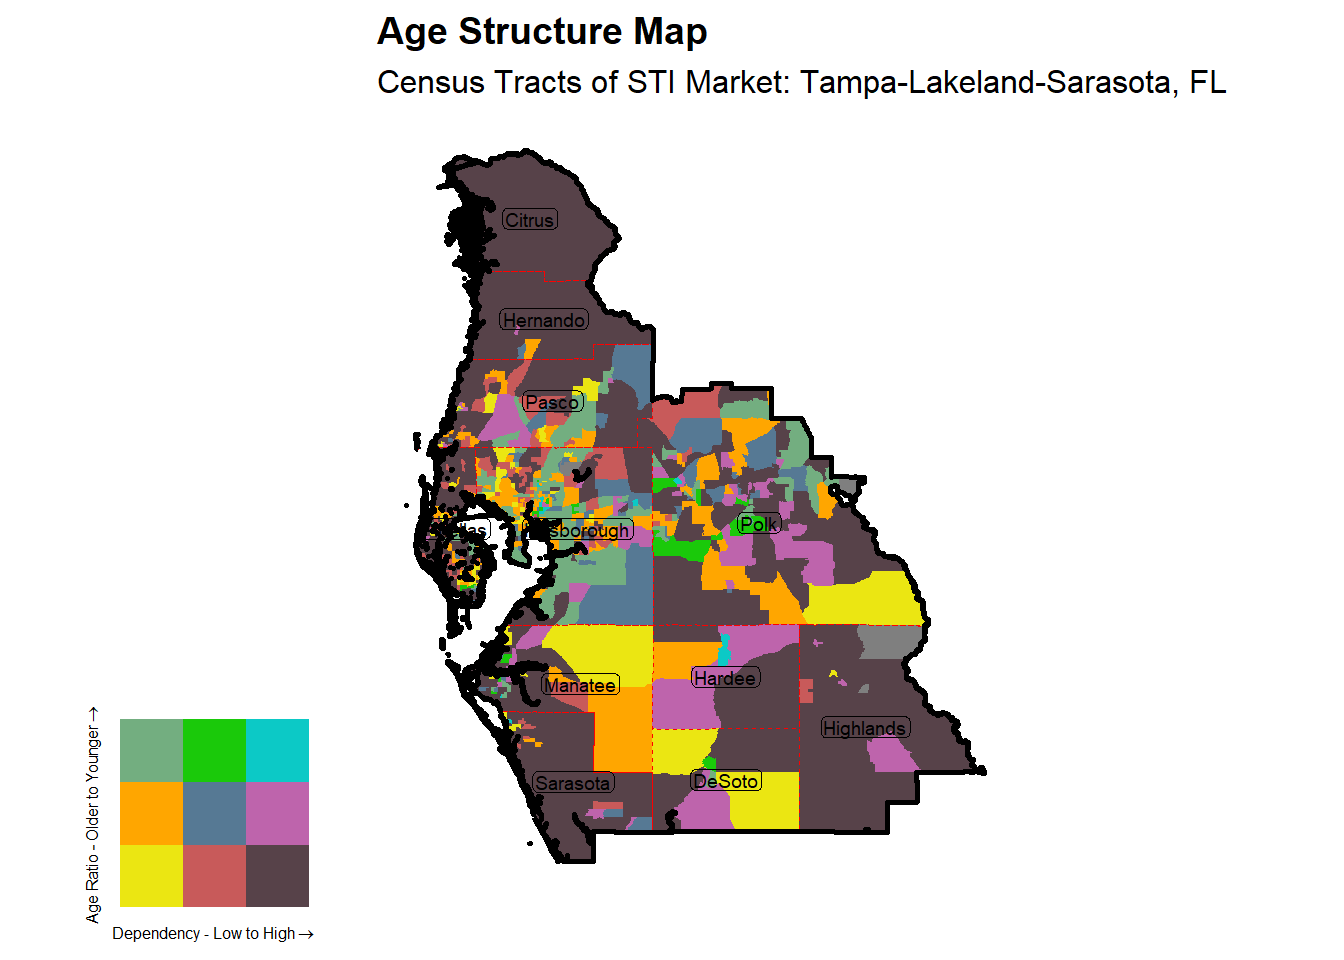 Age Structure Class by Census Tract